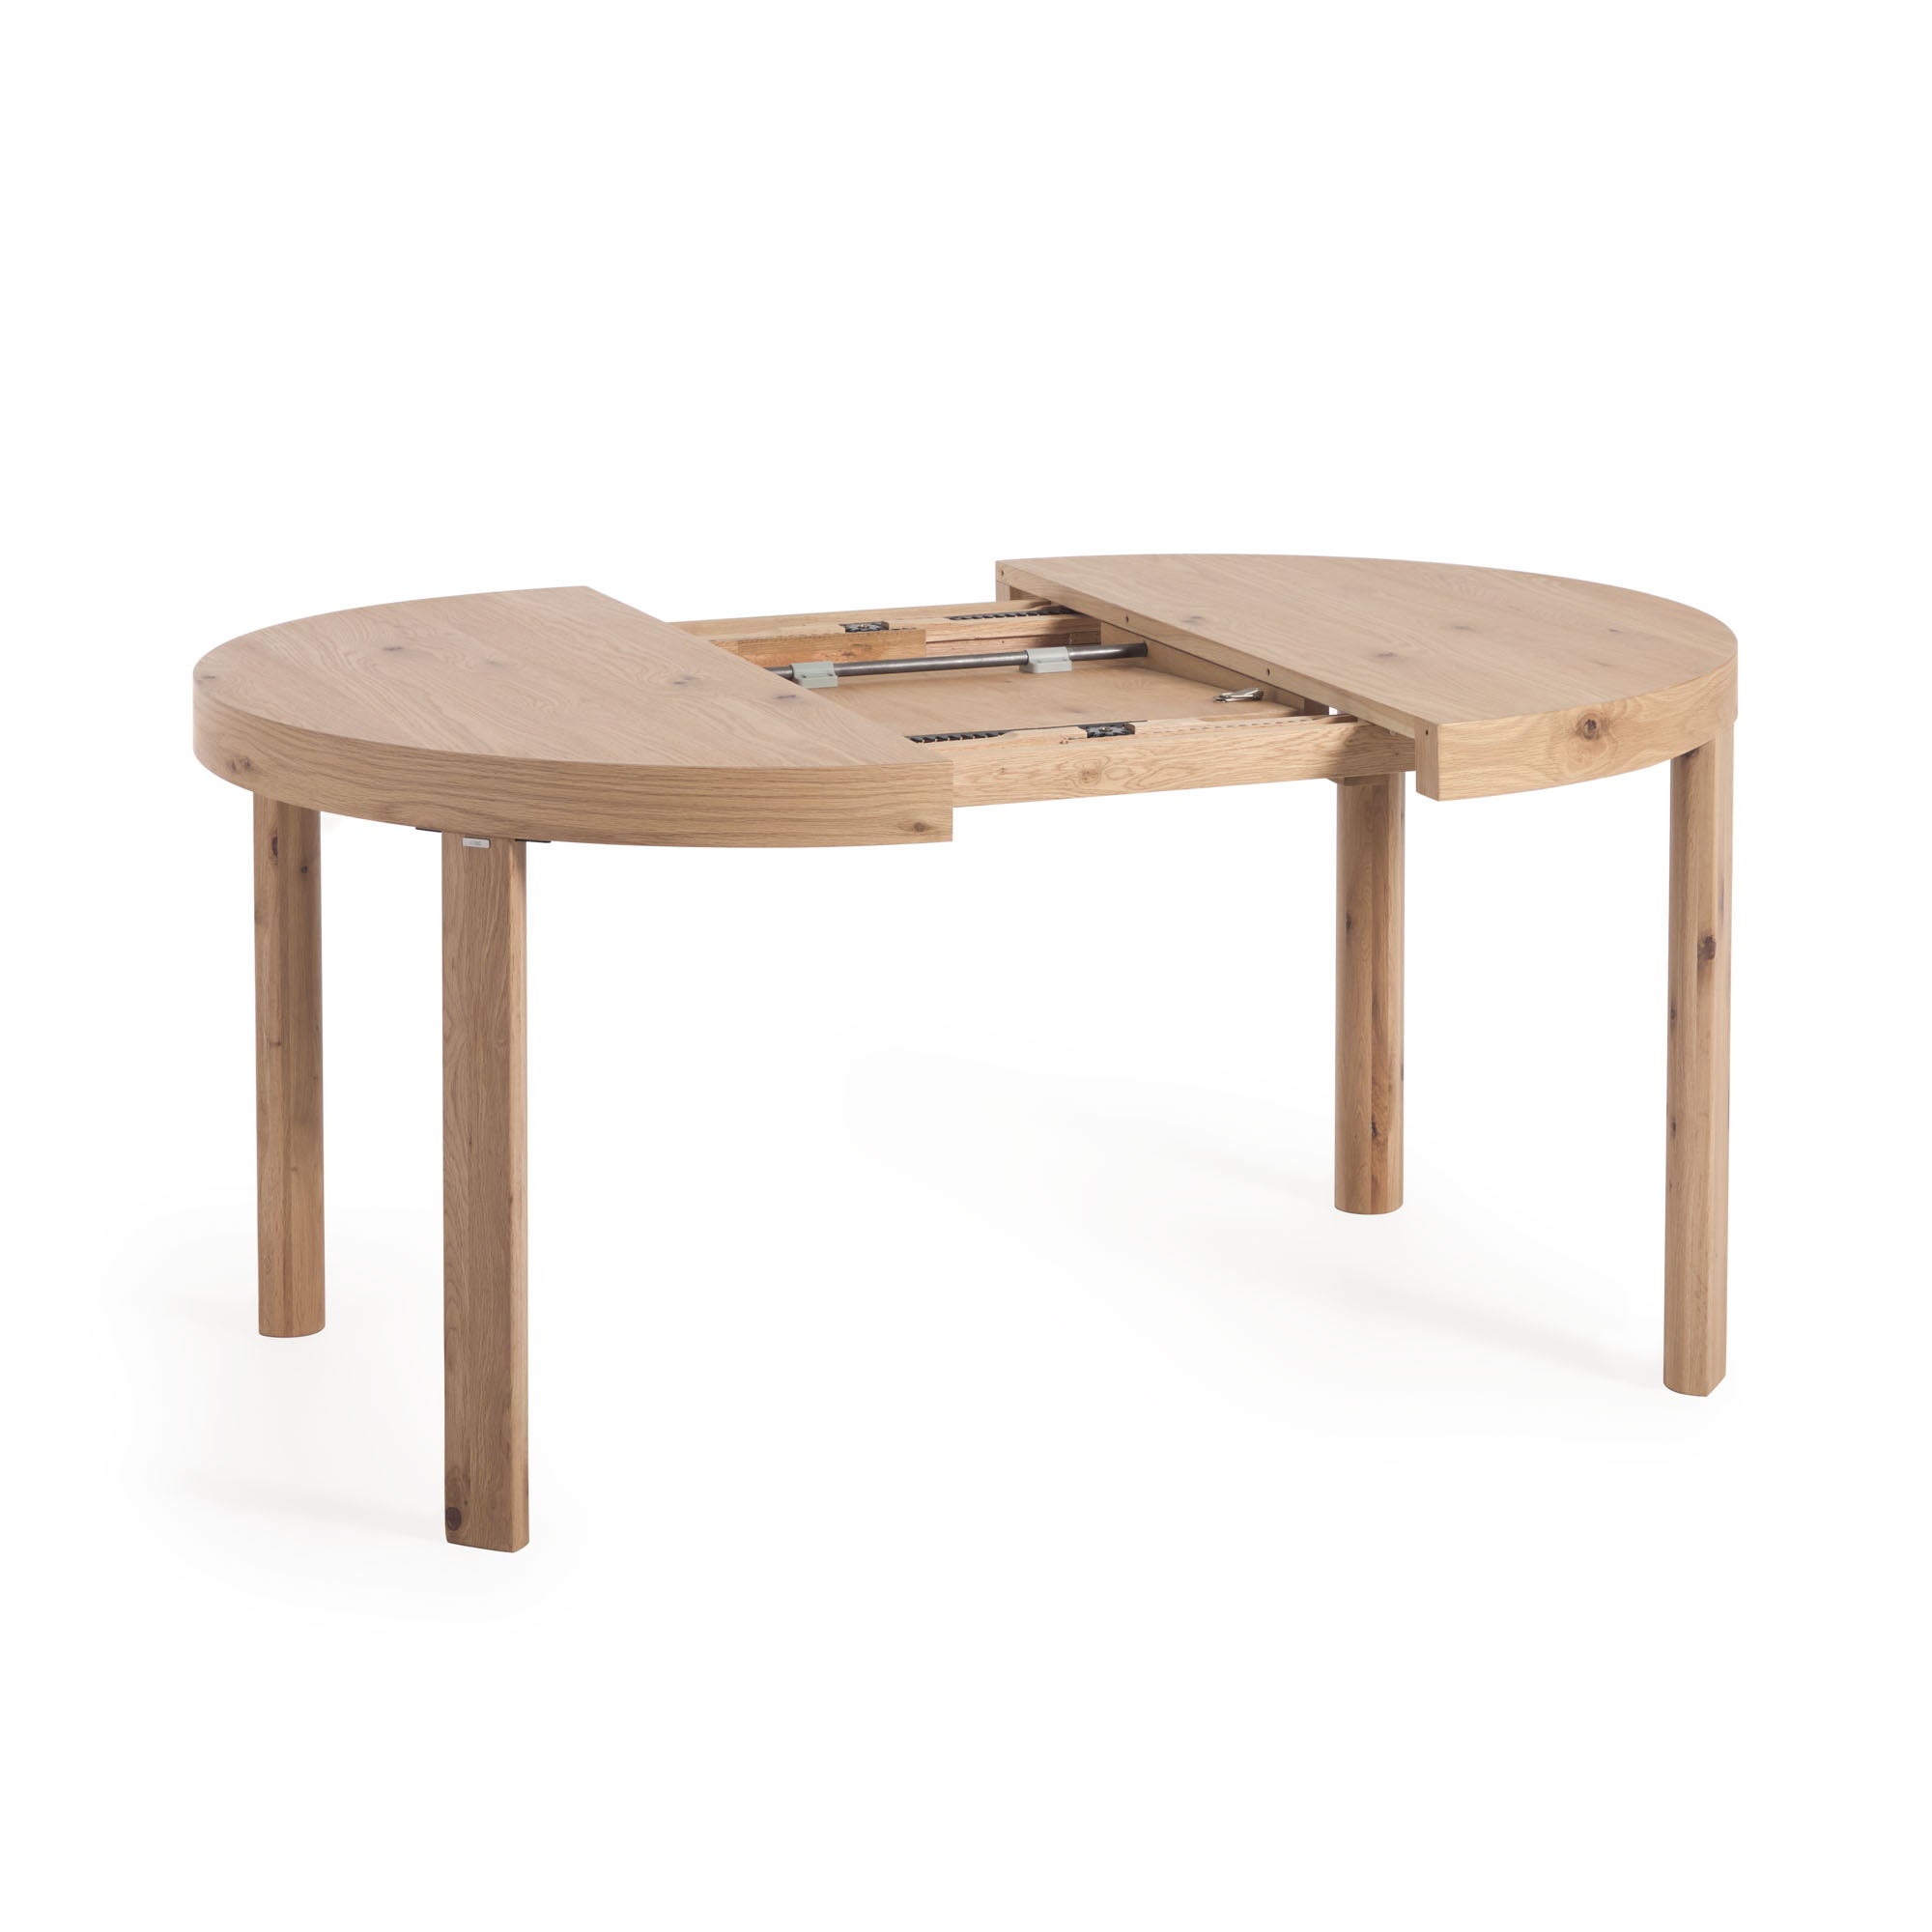 Extendable circular table Colleen with an oak veneer and solid wood legs Ø120(170)x120 cm